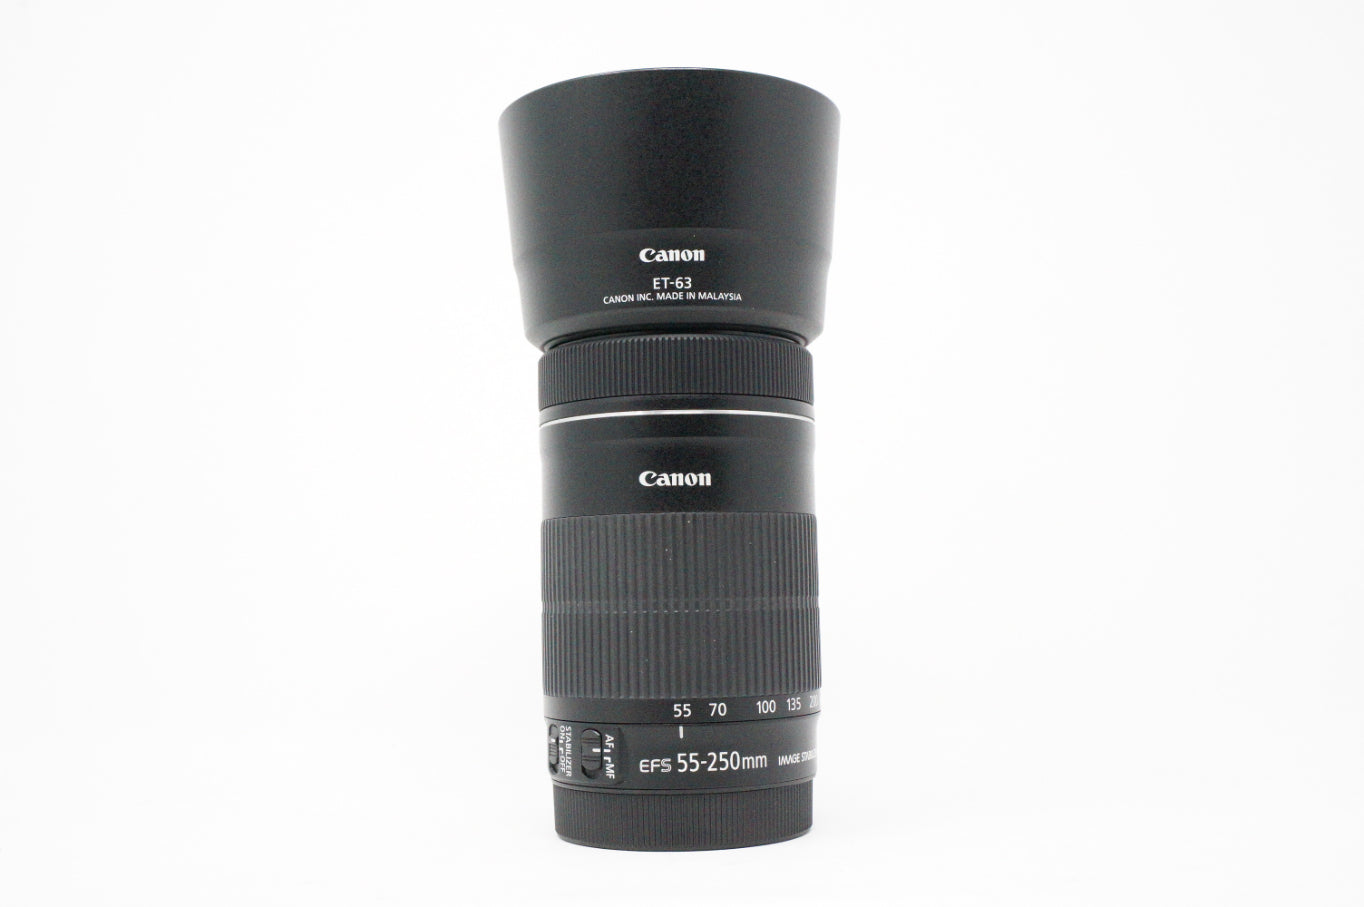 Used Canon EF-S 55-250mm F/4.5-5.6 IS STM lens